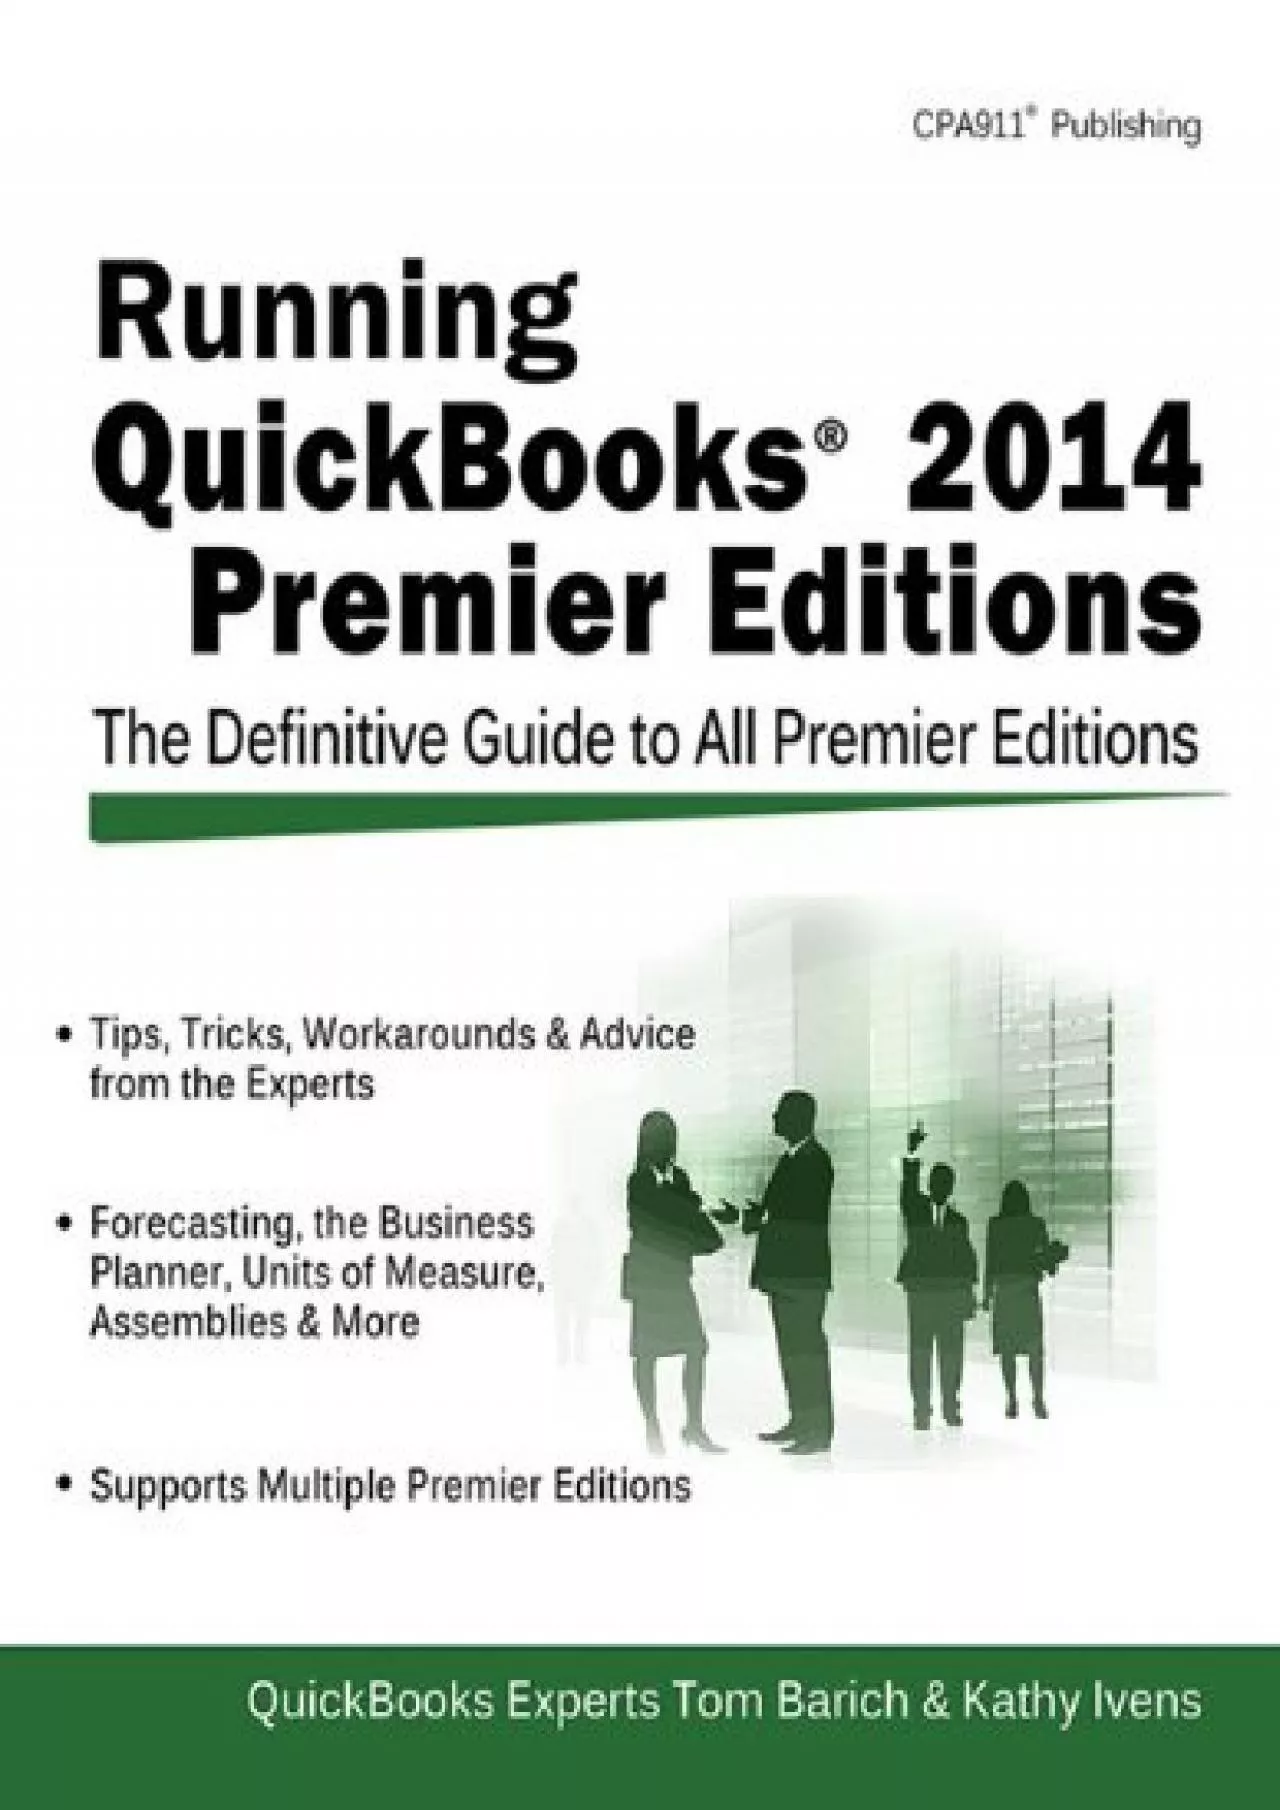 (EBOOK)-Running QuickBooks 2014 Premier Editions: The Only Definitive Guide to the Premier